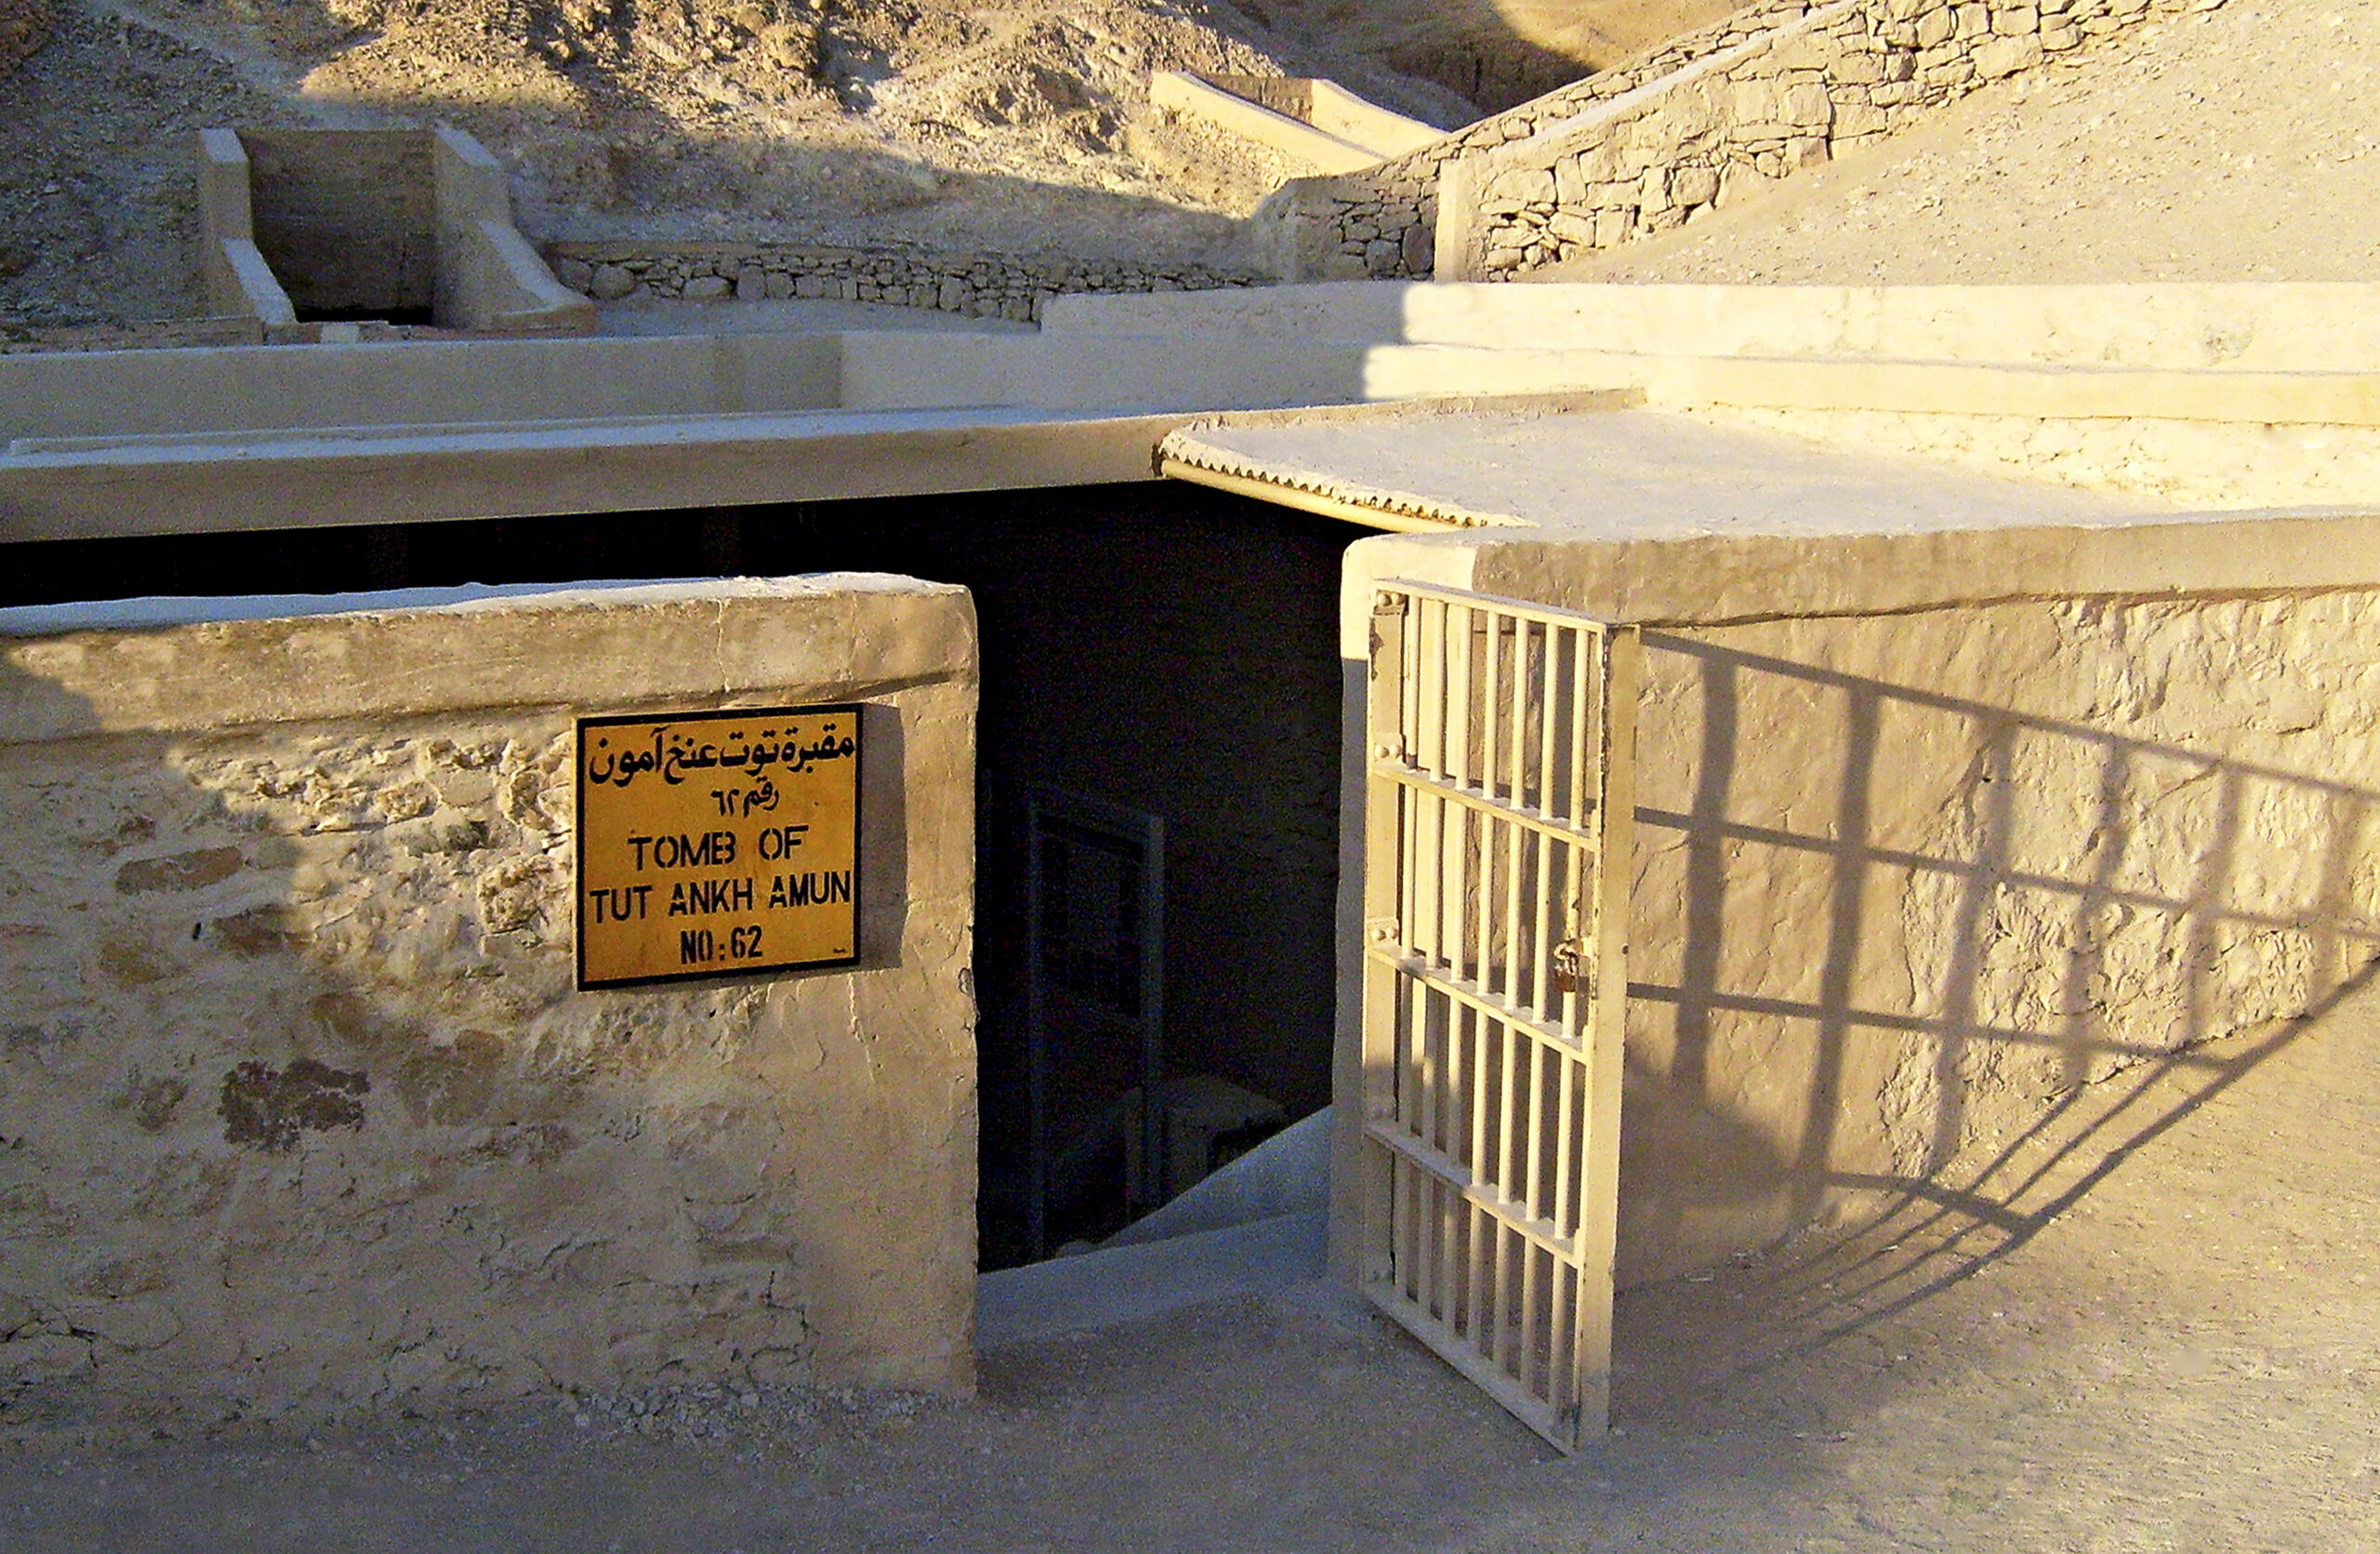 a wall and gate surround a set of stairs leading down into the ground of a desert; a plaque on the wall reads 'tomb of tutankhamun'